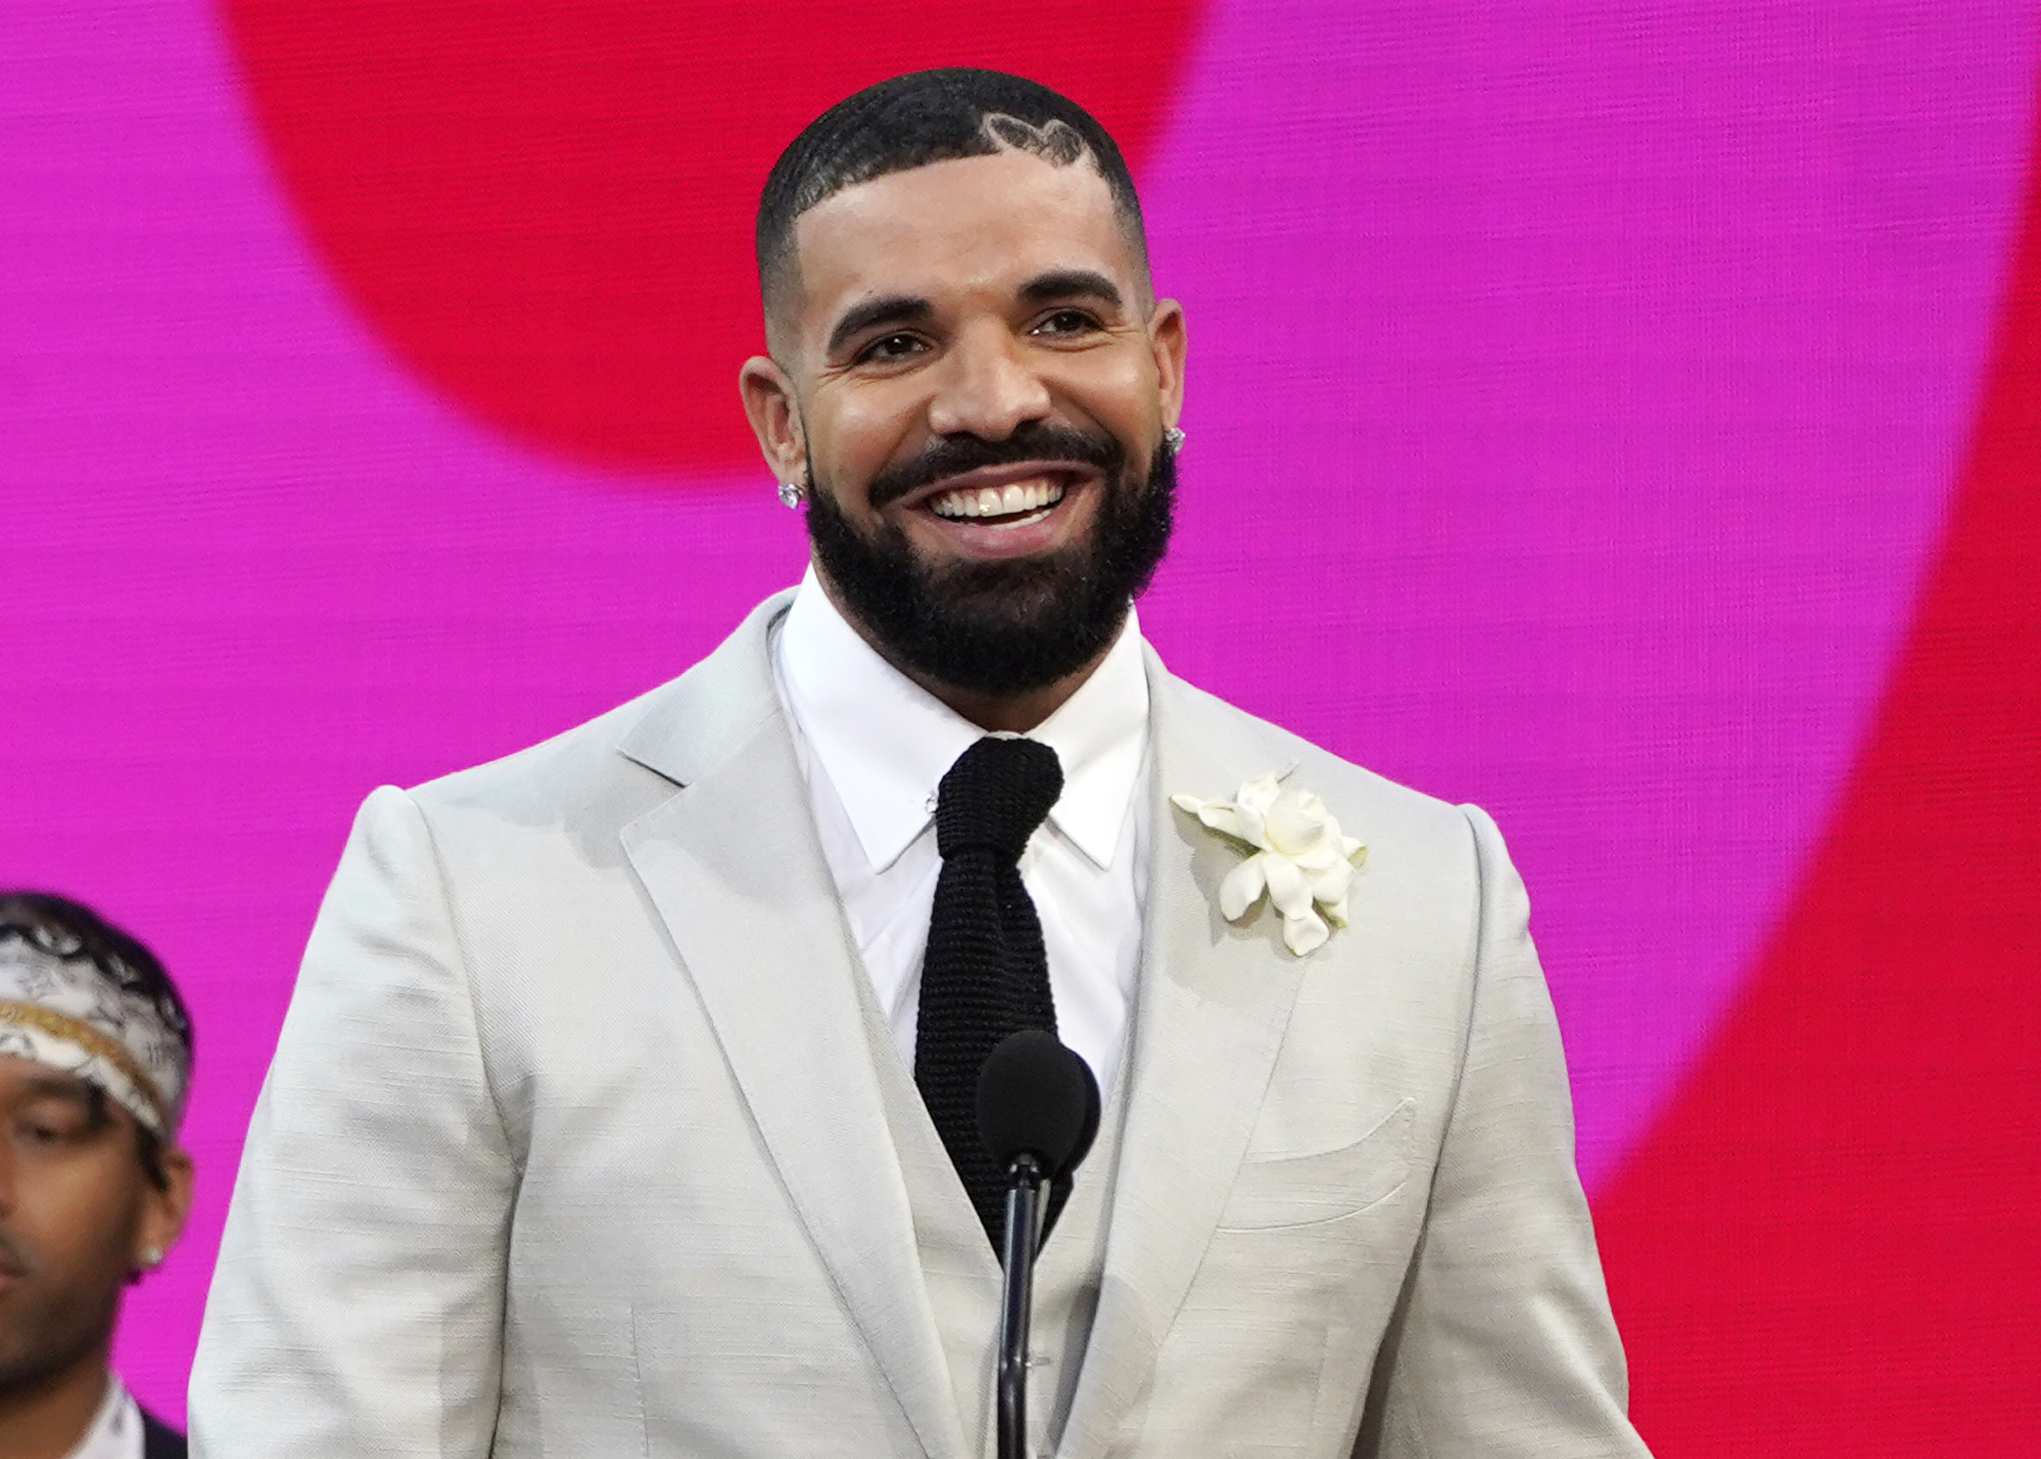 Drake reportedly announces he's moving to Houston during concert